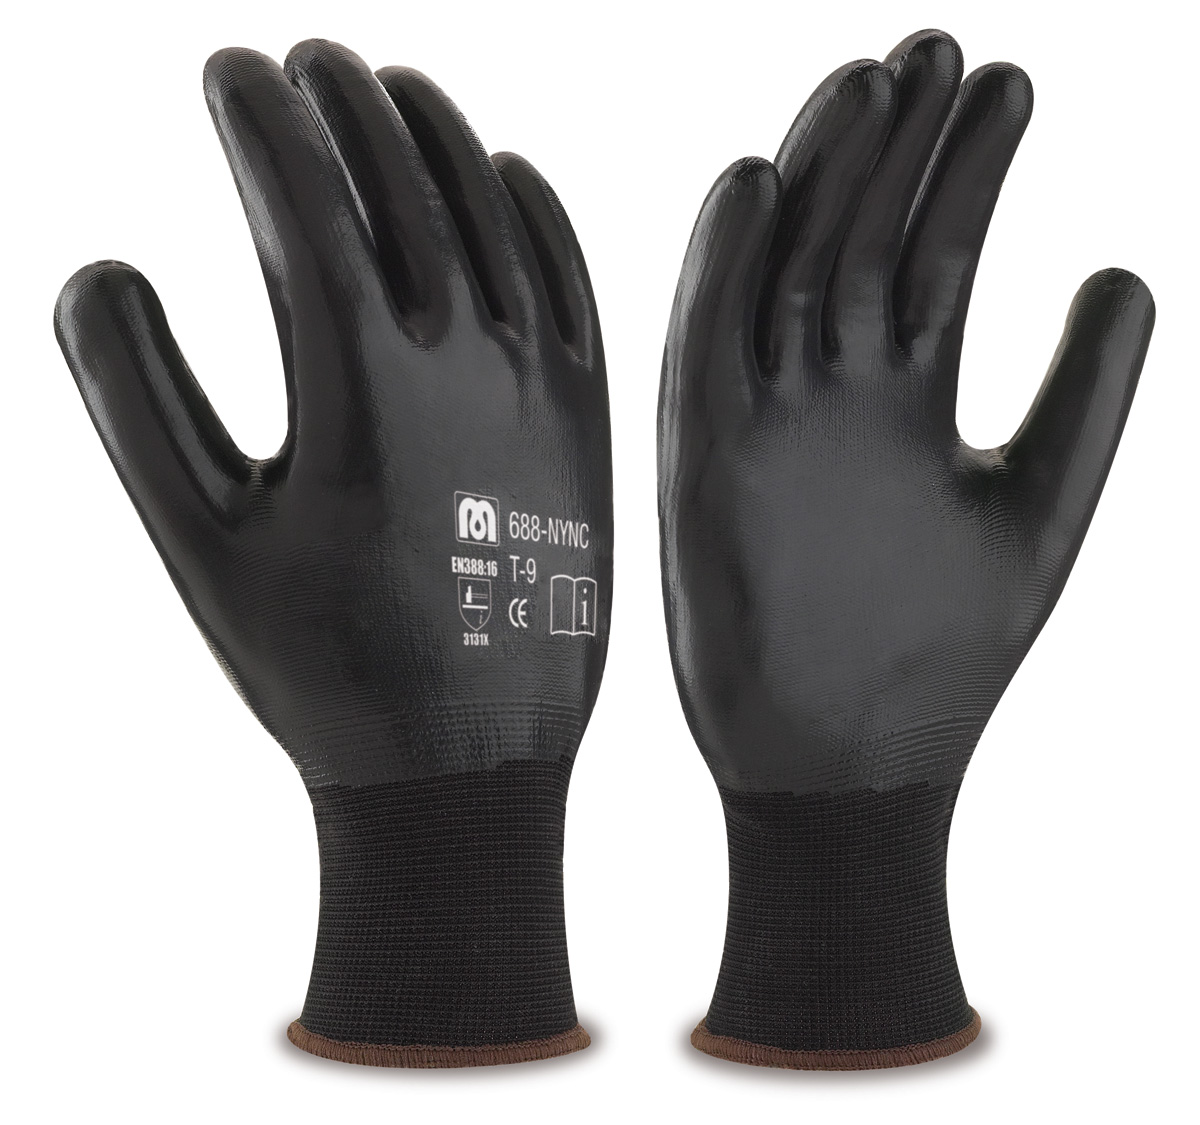 688-NYNC Work Gloves Nylon Black polyester glove with black nitrile coating on the palms, fingers and back.